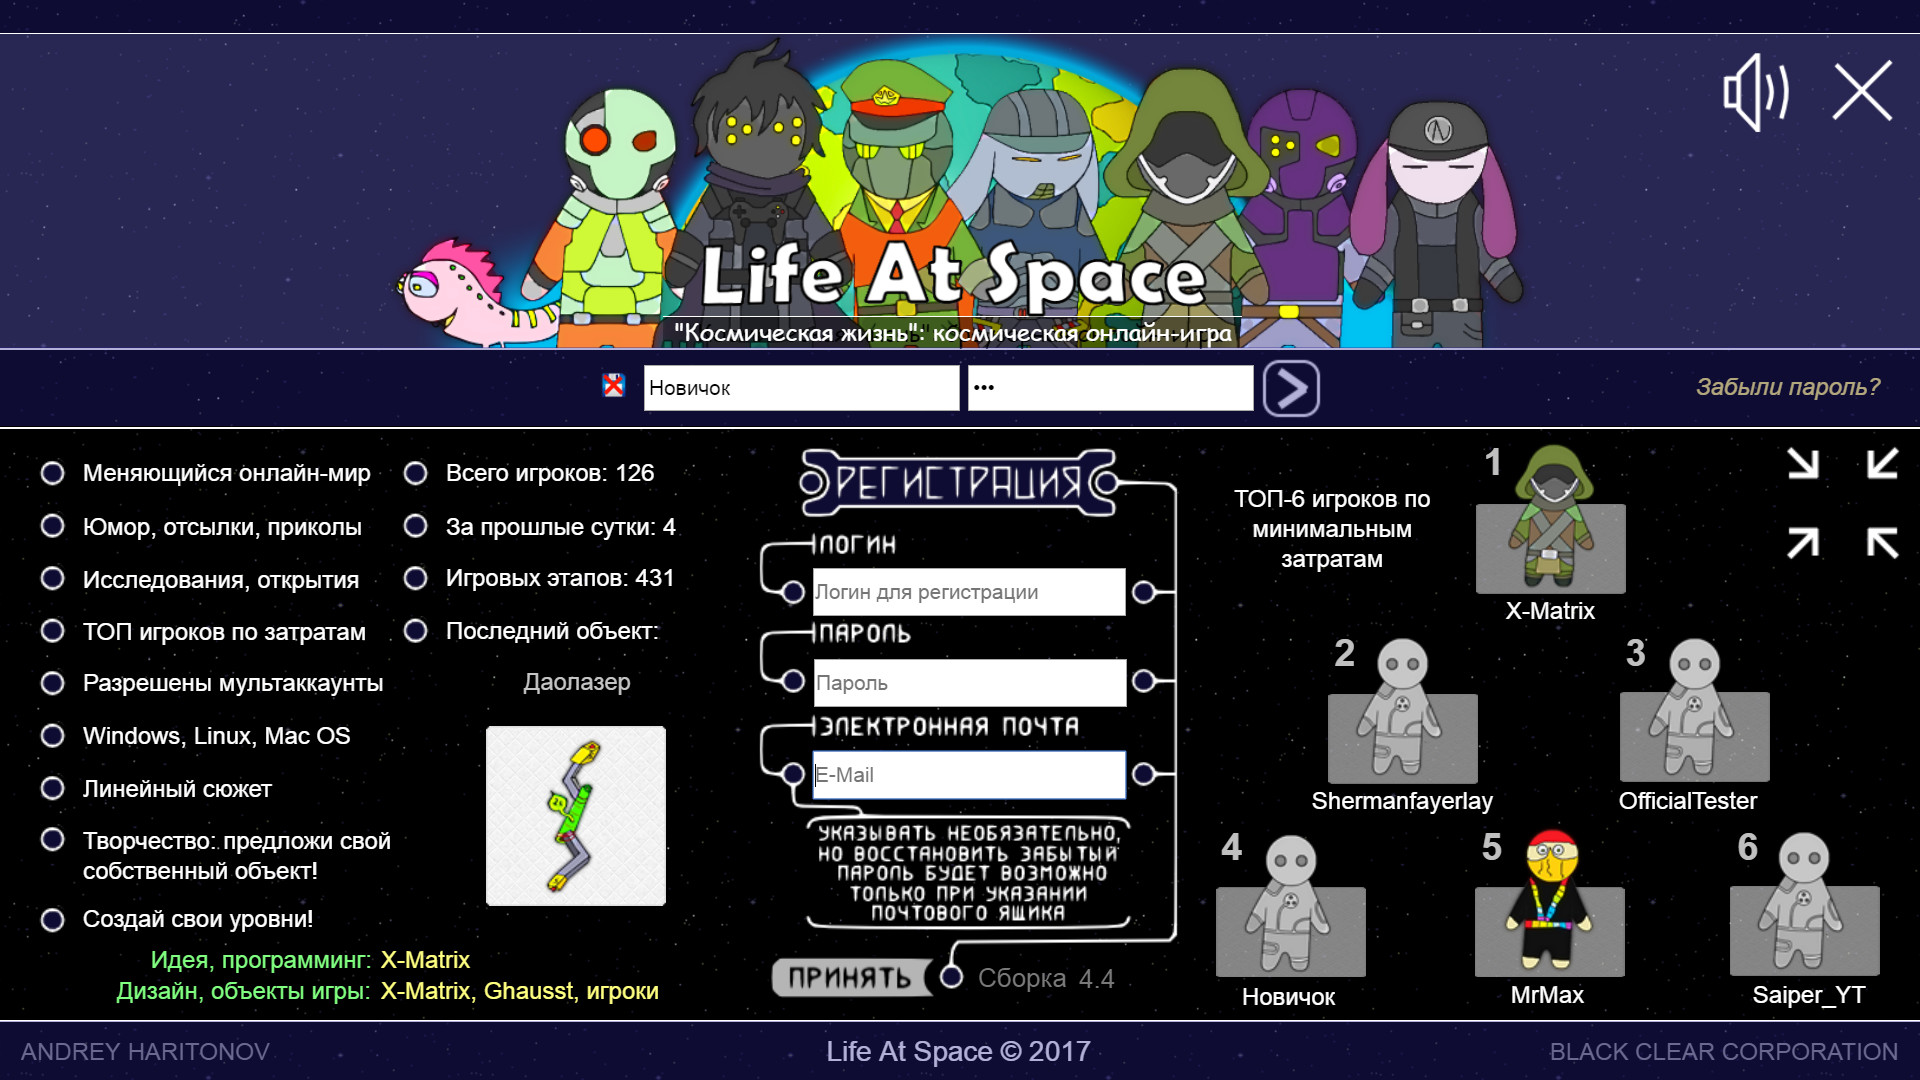 3 life space. Life at Spaces. Уровни в играх новичок. Game of Life Spaceship. Spaces to Life.